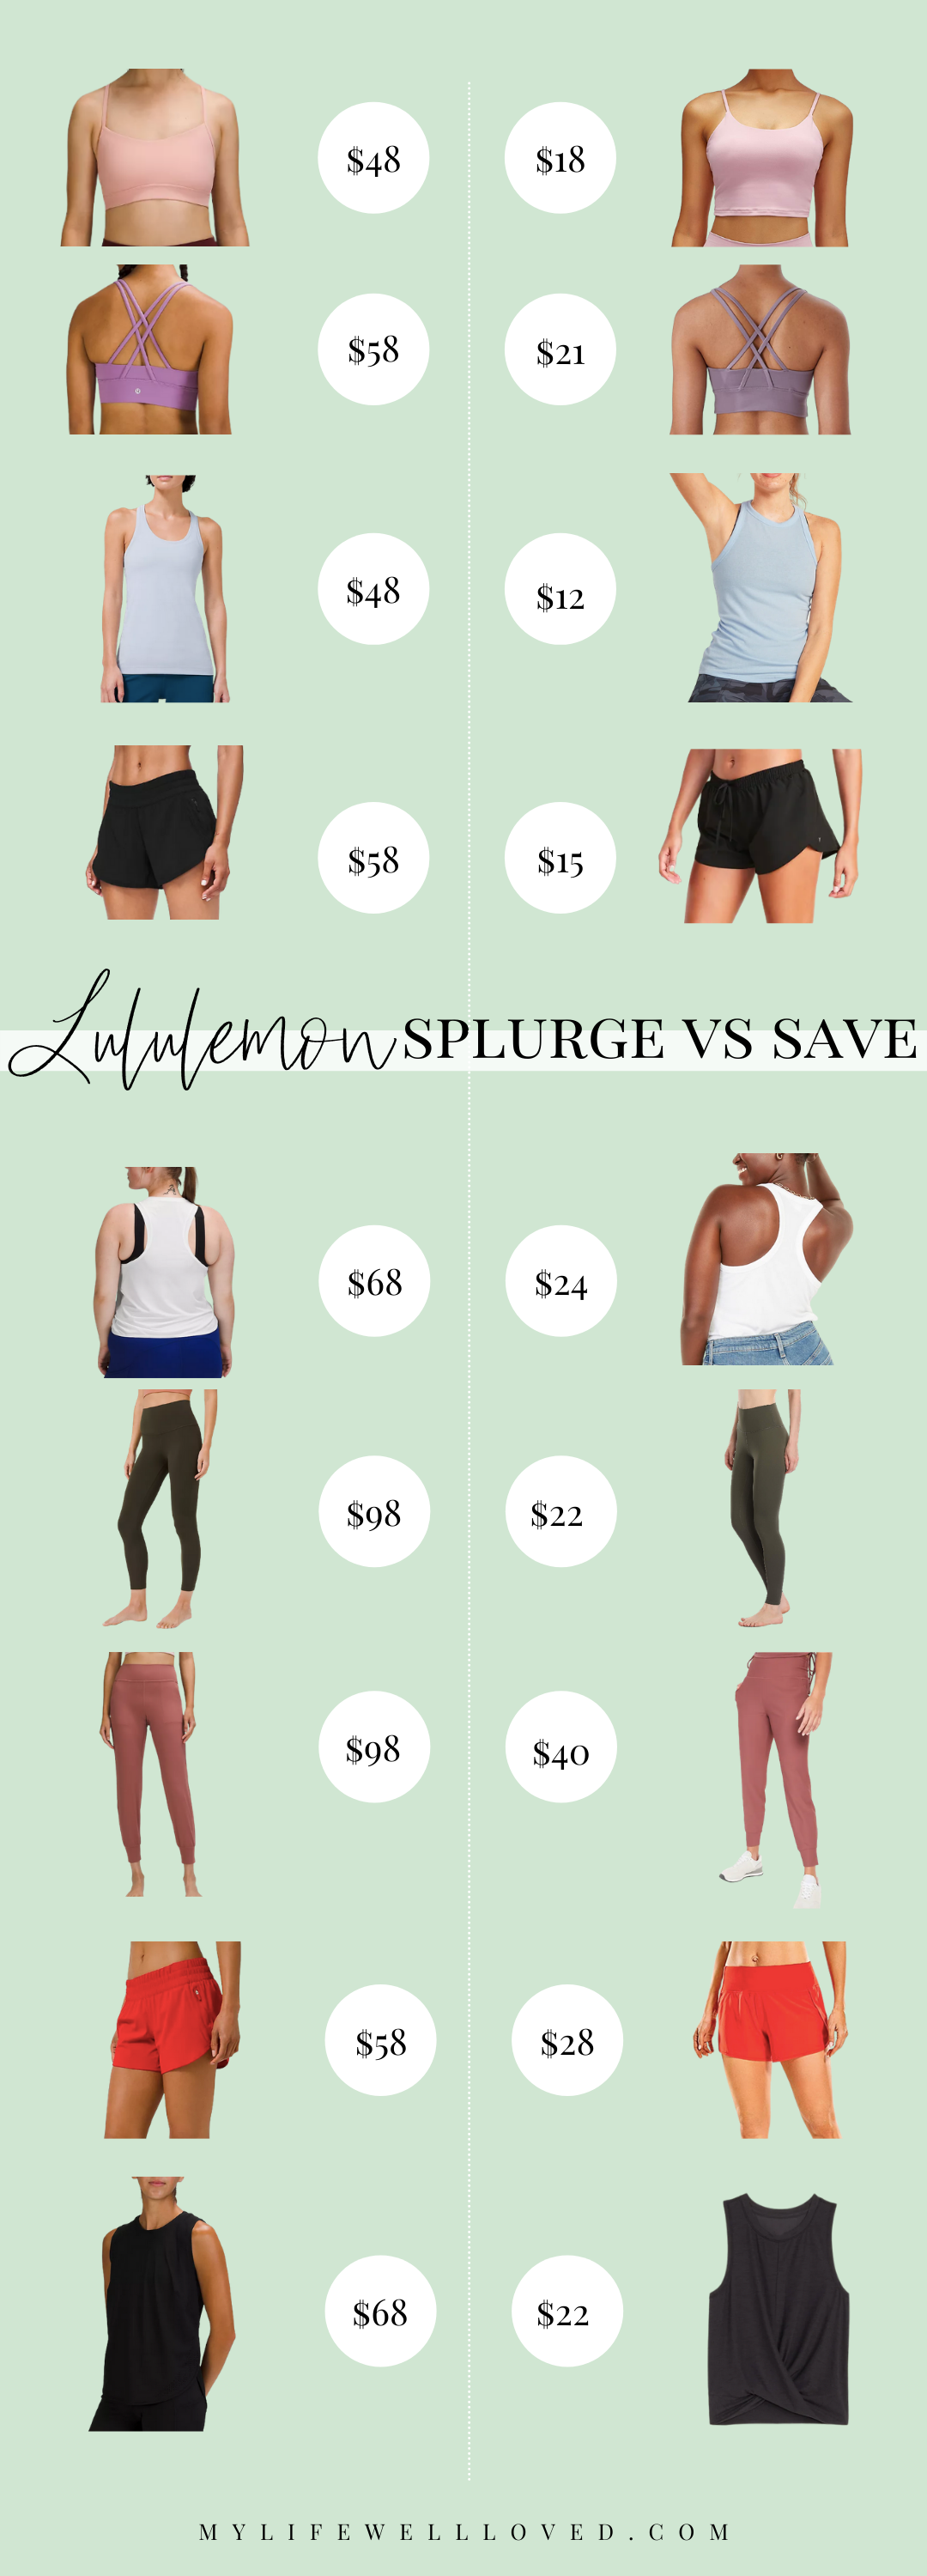 My Fave Lululemon Dupes (All $25 and Under!)